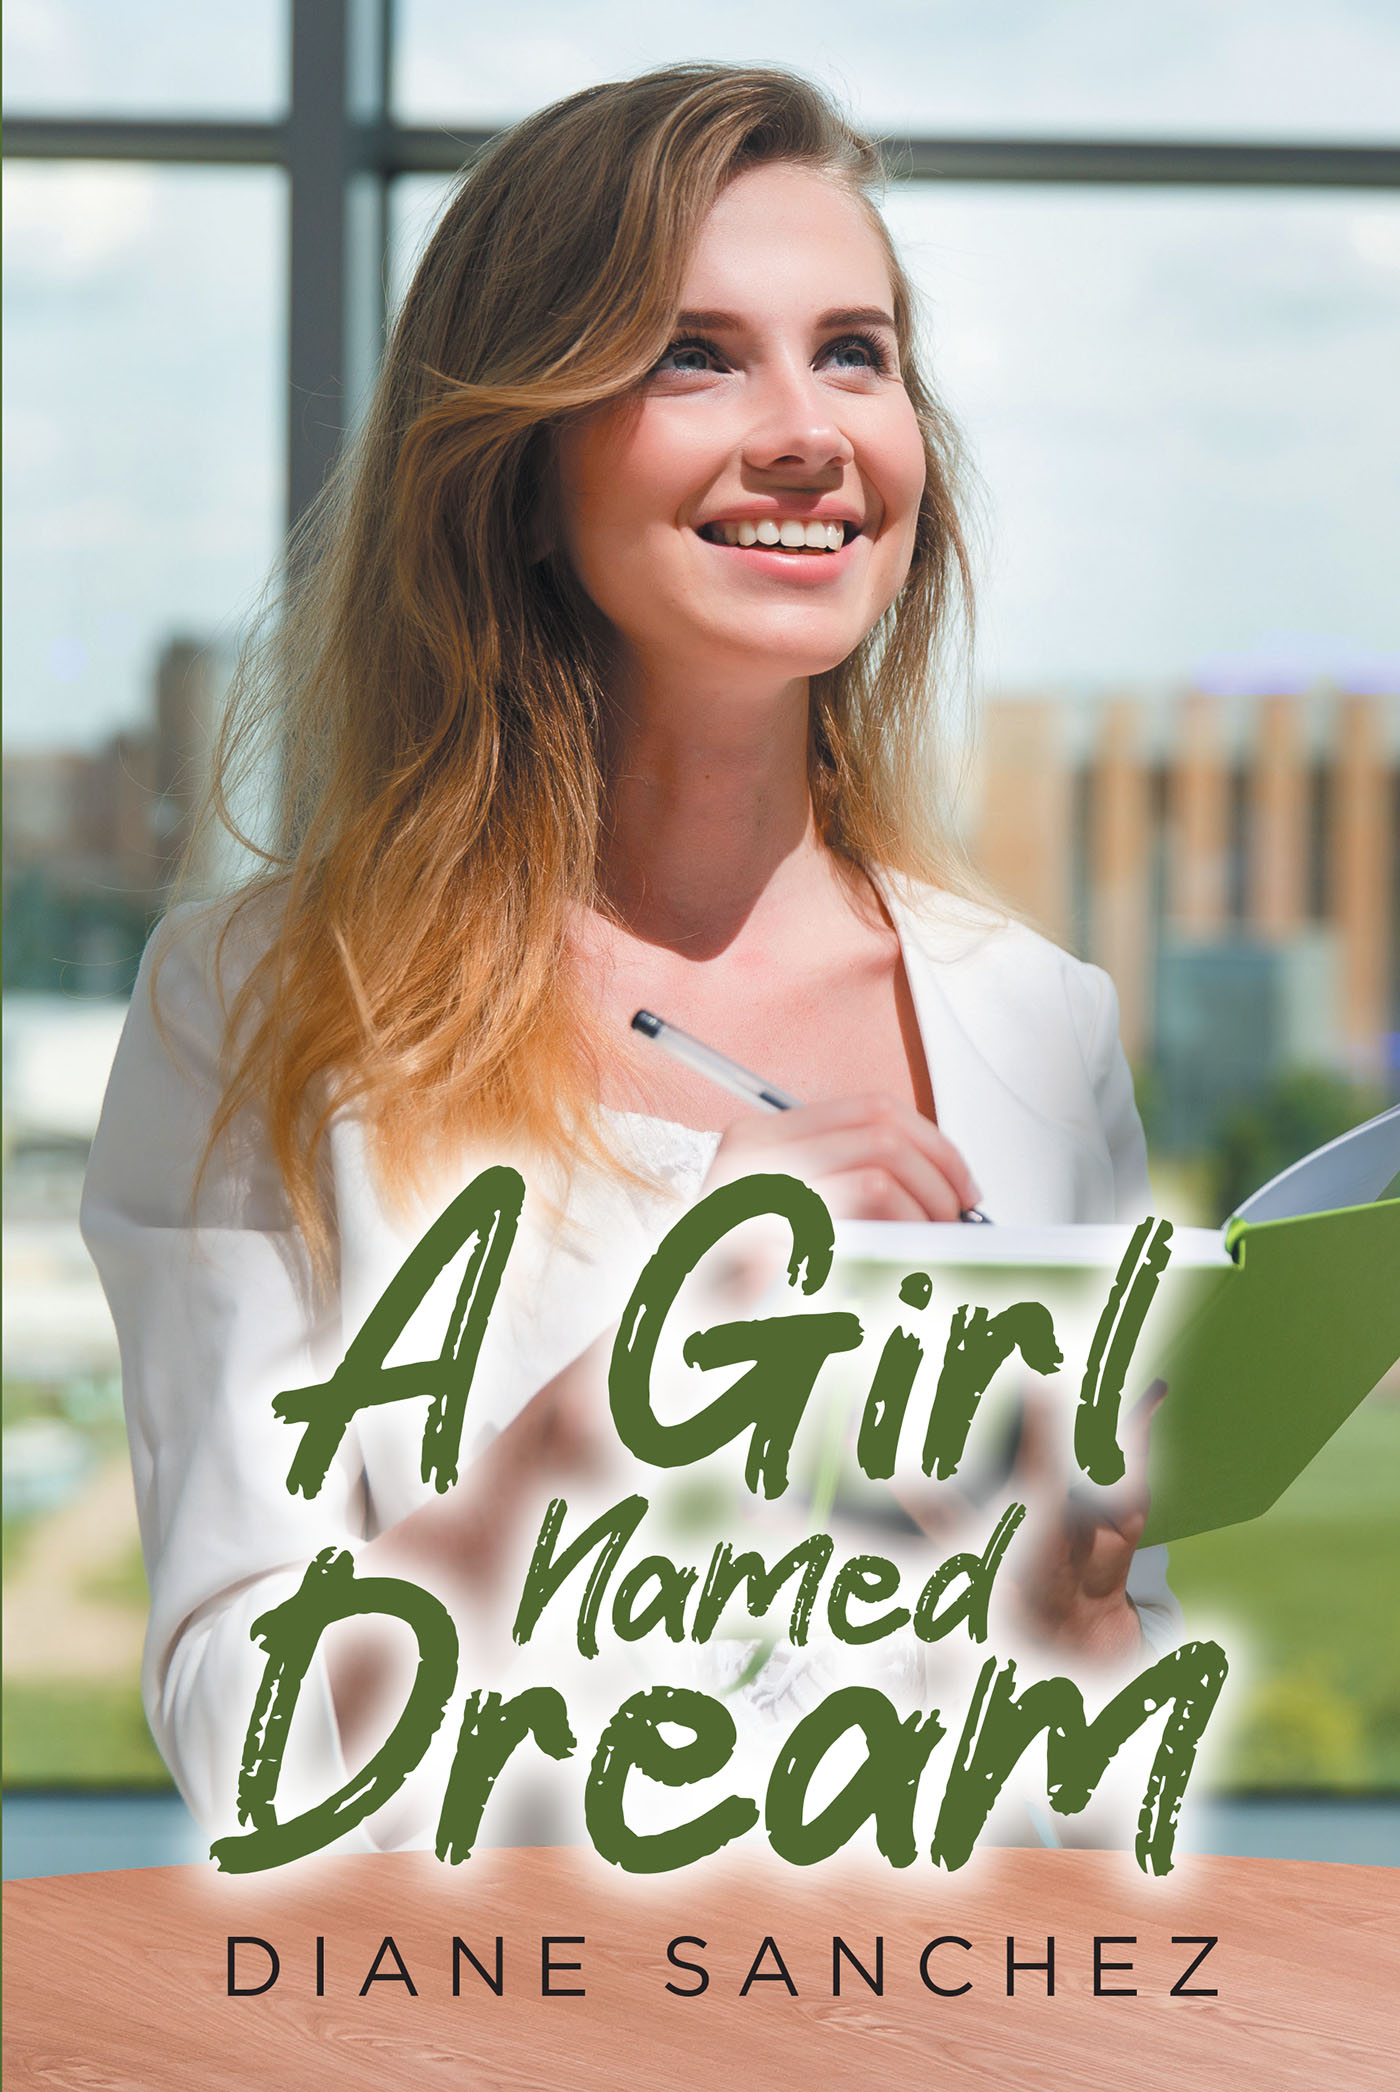 Author Diane Sanchez’s New Book, "A Girl Named Dream," is a Fascinating Story That Reveals the Importance of Following One's Hopes and Dreams in Life, No Matter the Cost